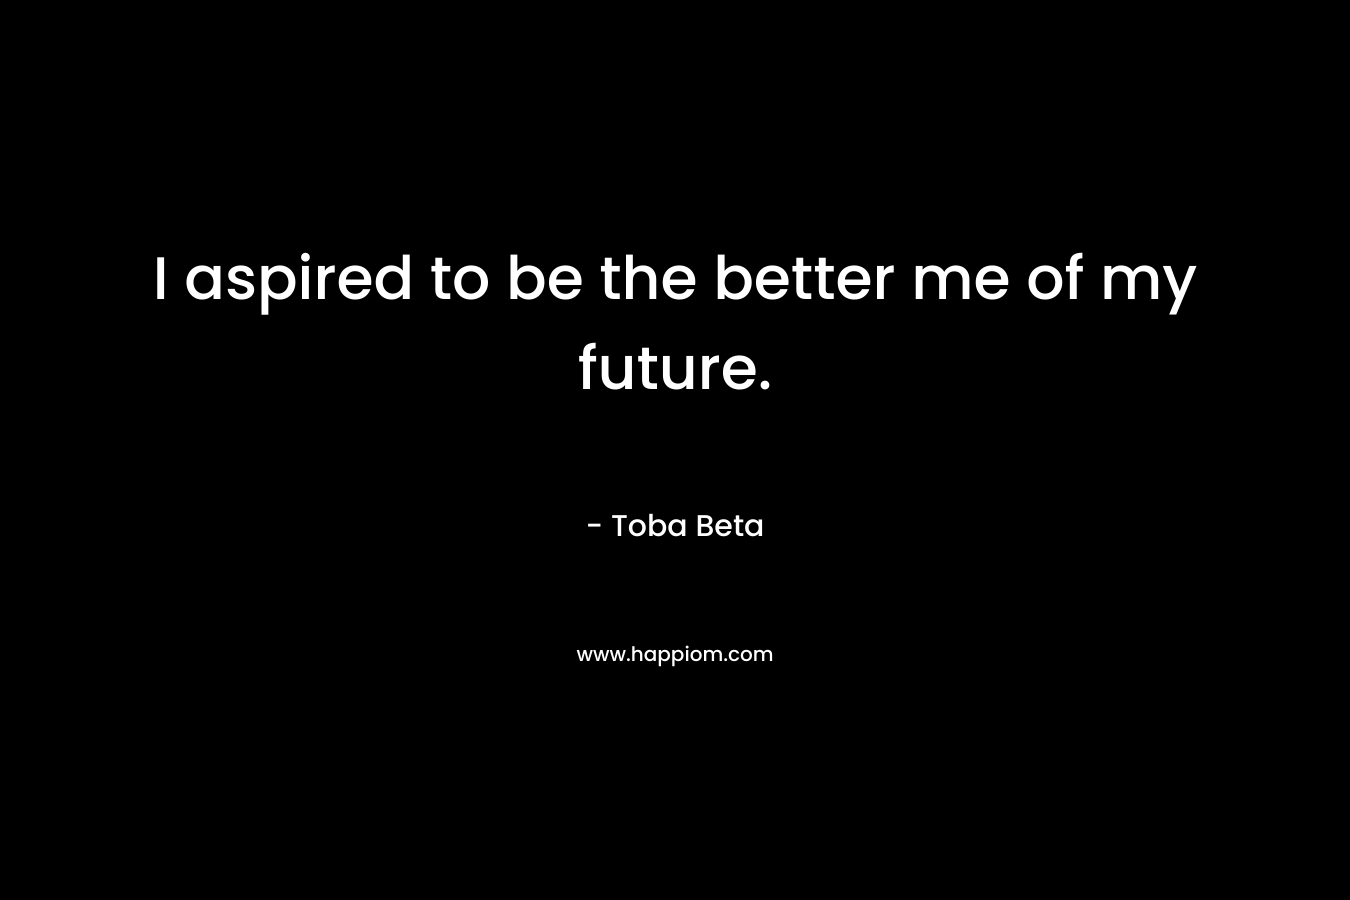 I aspired to be the better me of my future. – Toba Beta